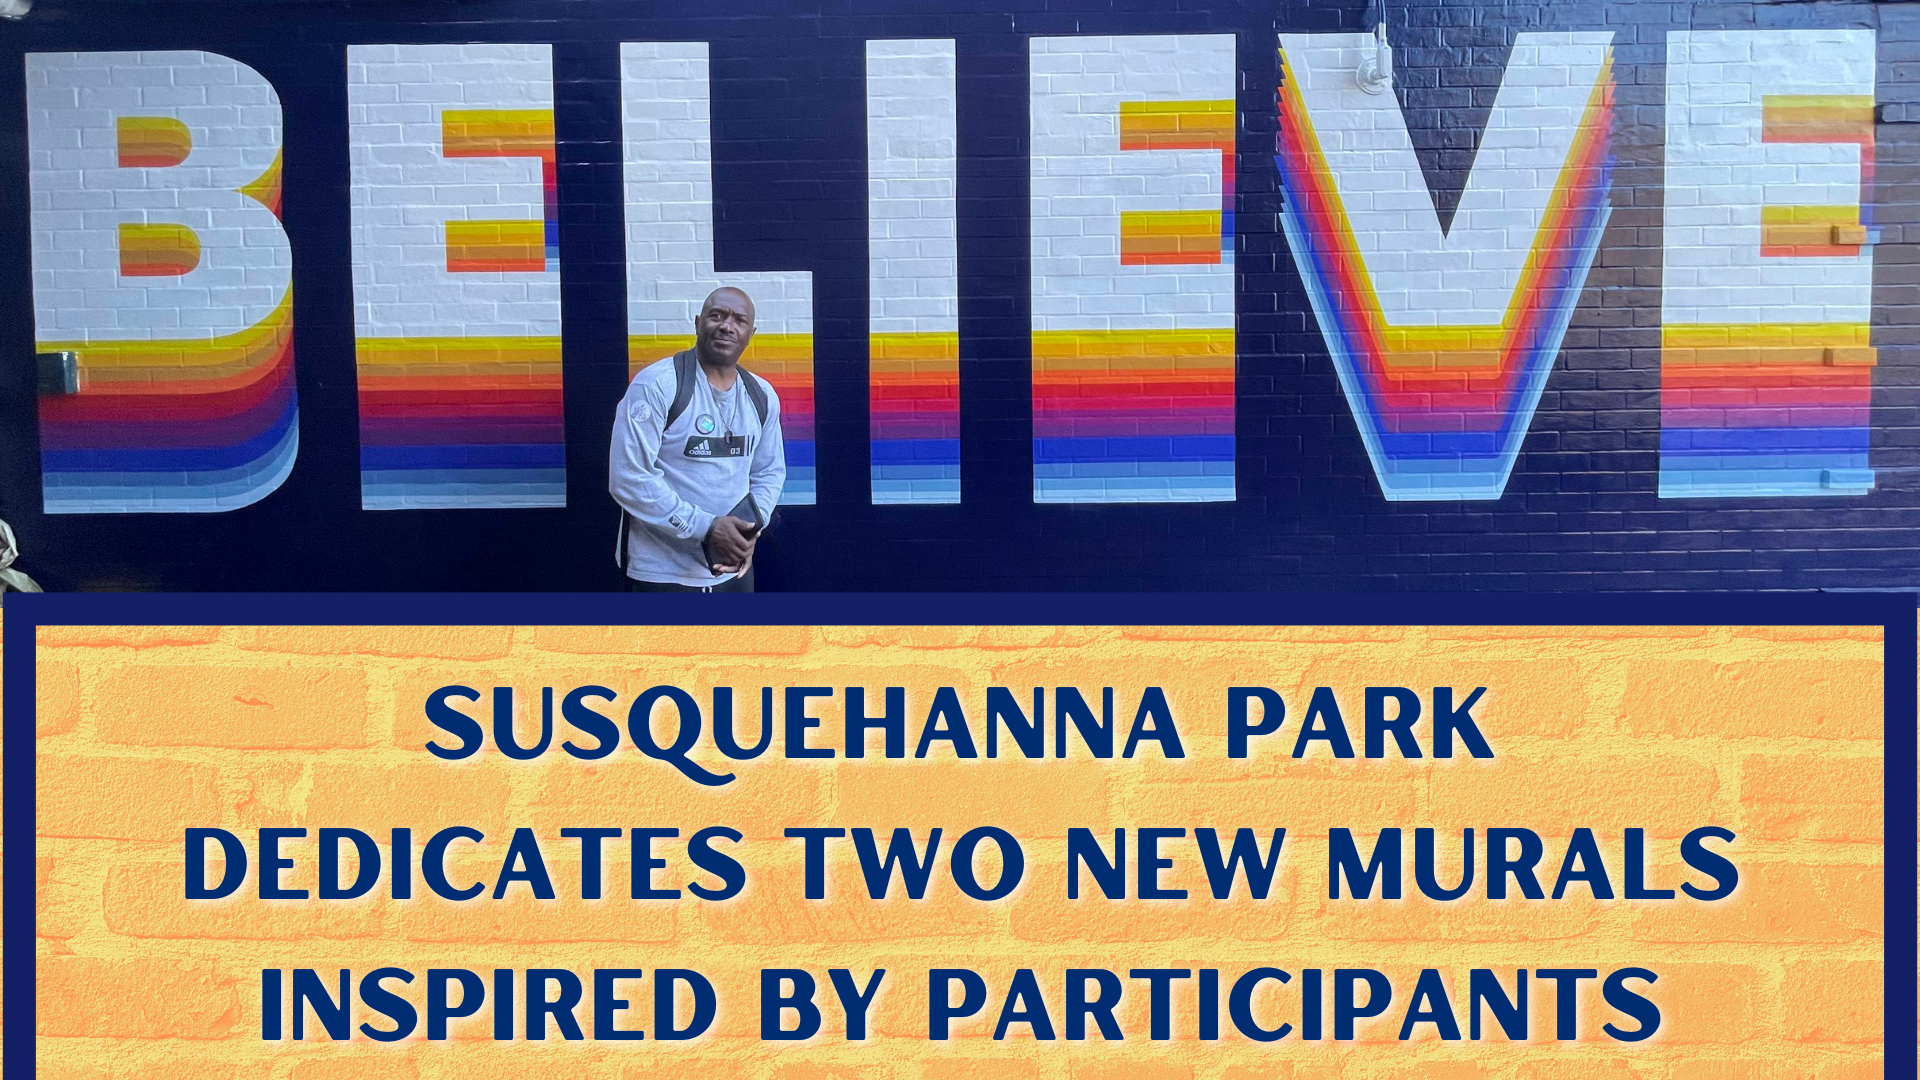 Susquehanna Park Dedicates Two New Murals Inspired By Participants